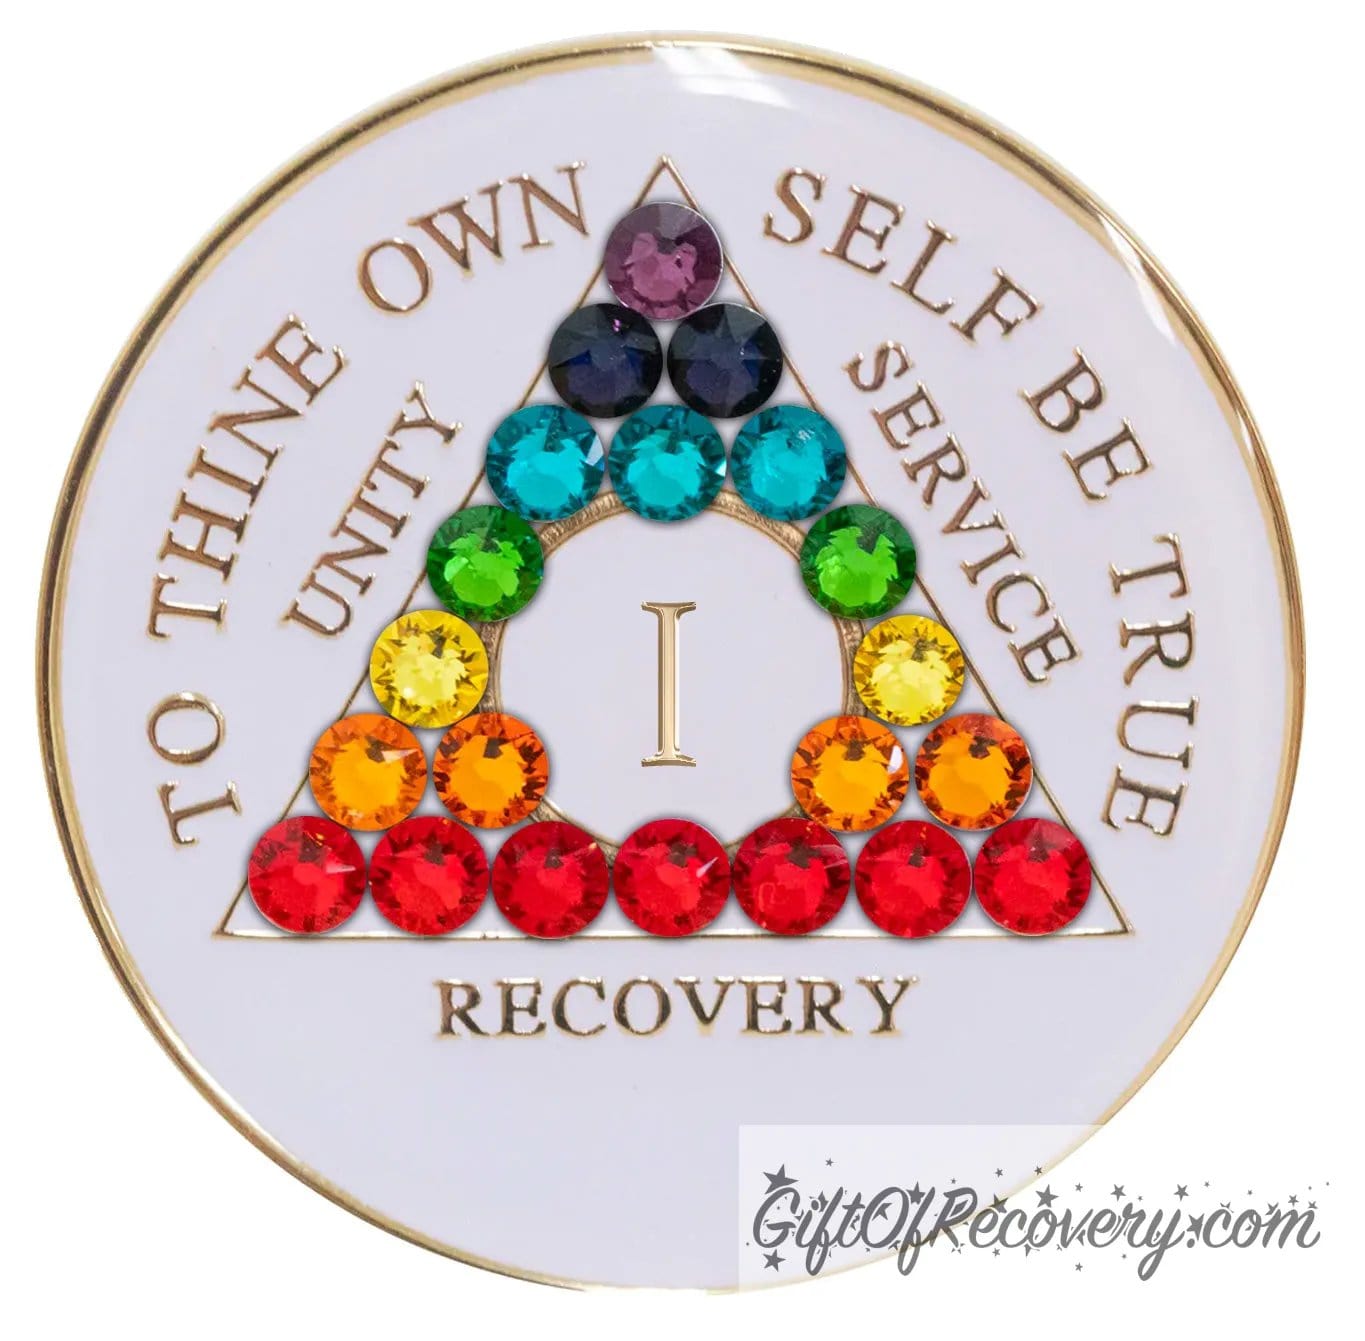 1 year AA medallion pearl white with 21 genuine crystals purple to red, representing each Chakra, AA moto and roman numeral are embossed with 14k gold-plated brass, sealed in a high-quality, chip and scratch-resistant resin dome giving it a beautiful glossy look that will last.